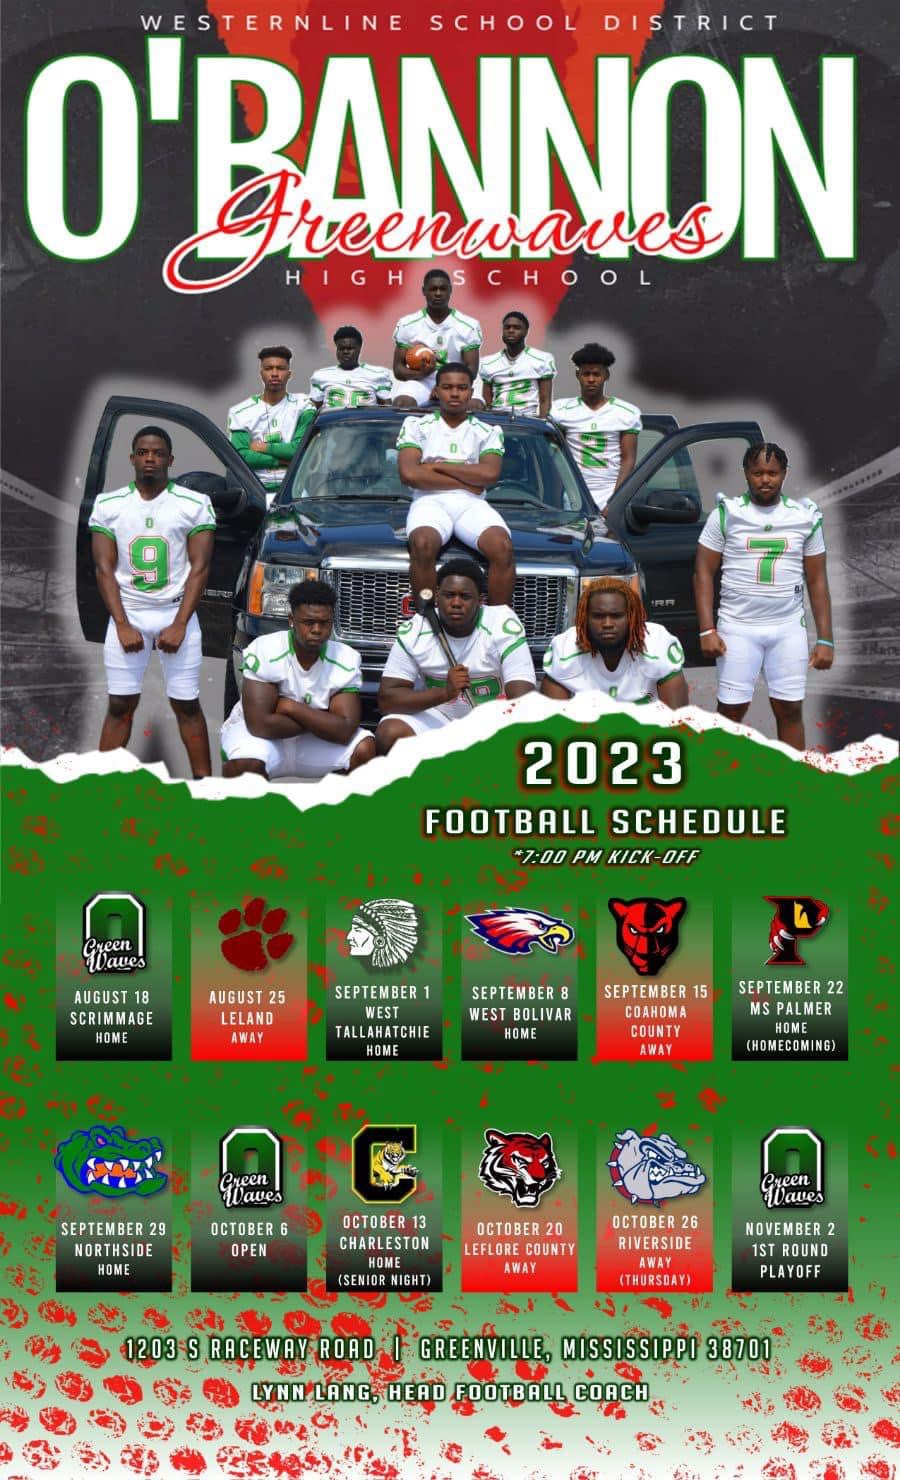 2022 FootB Sched